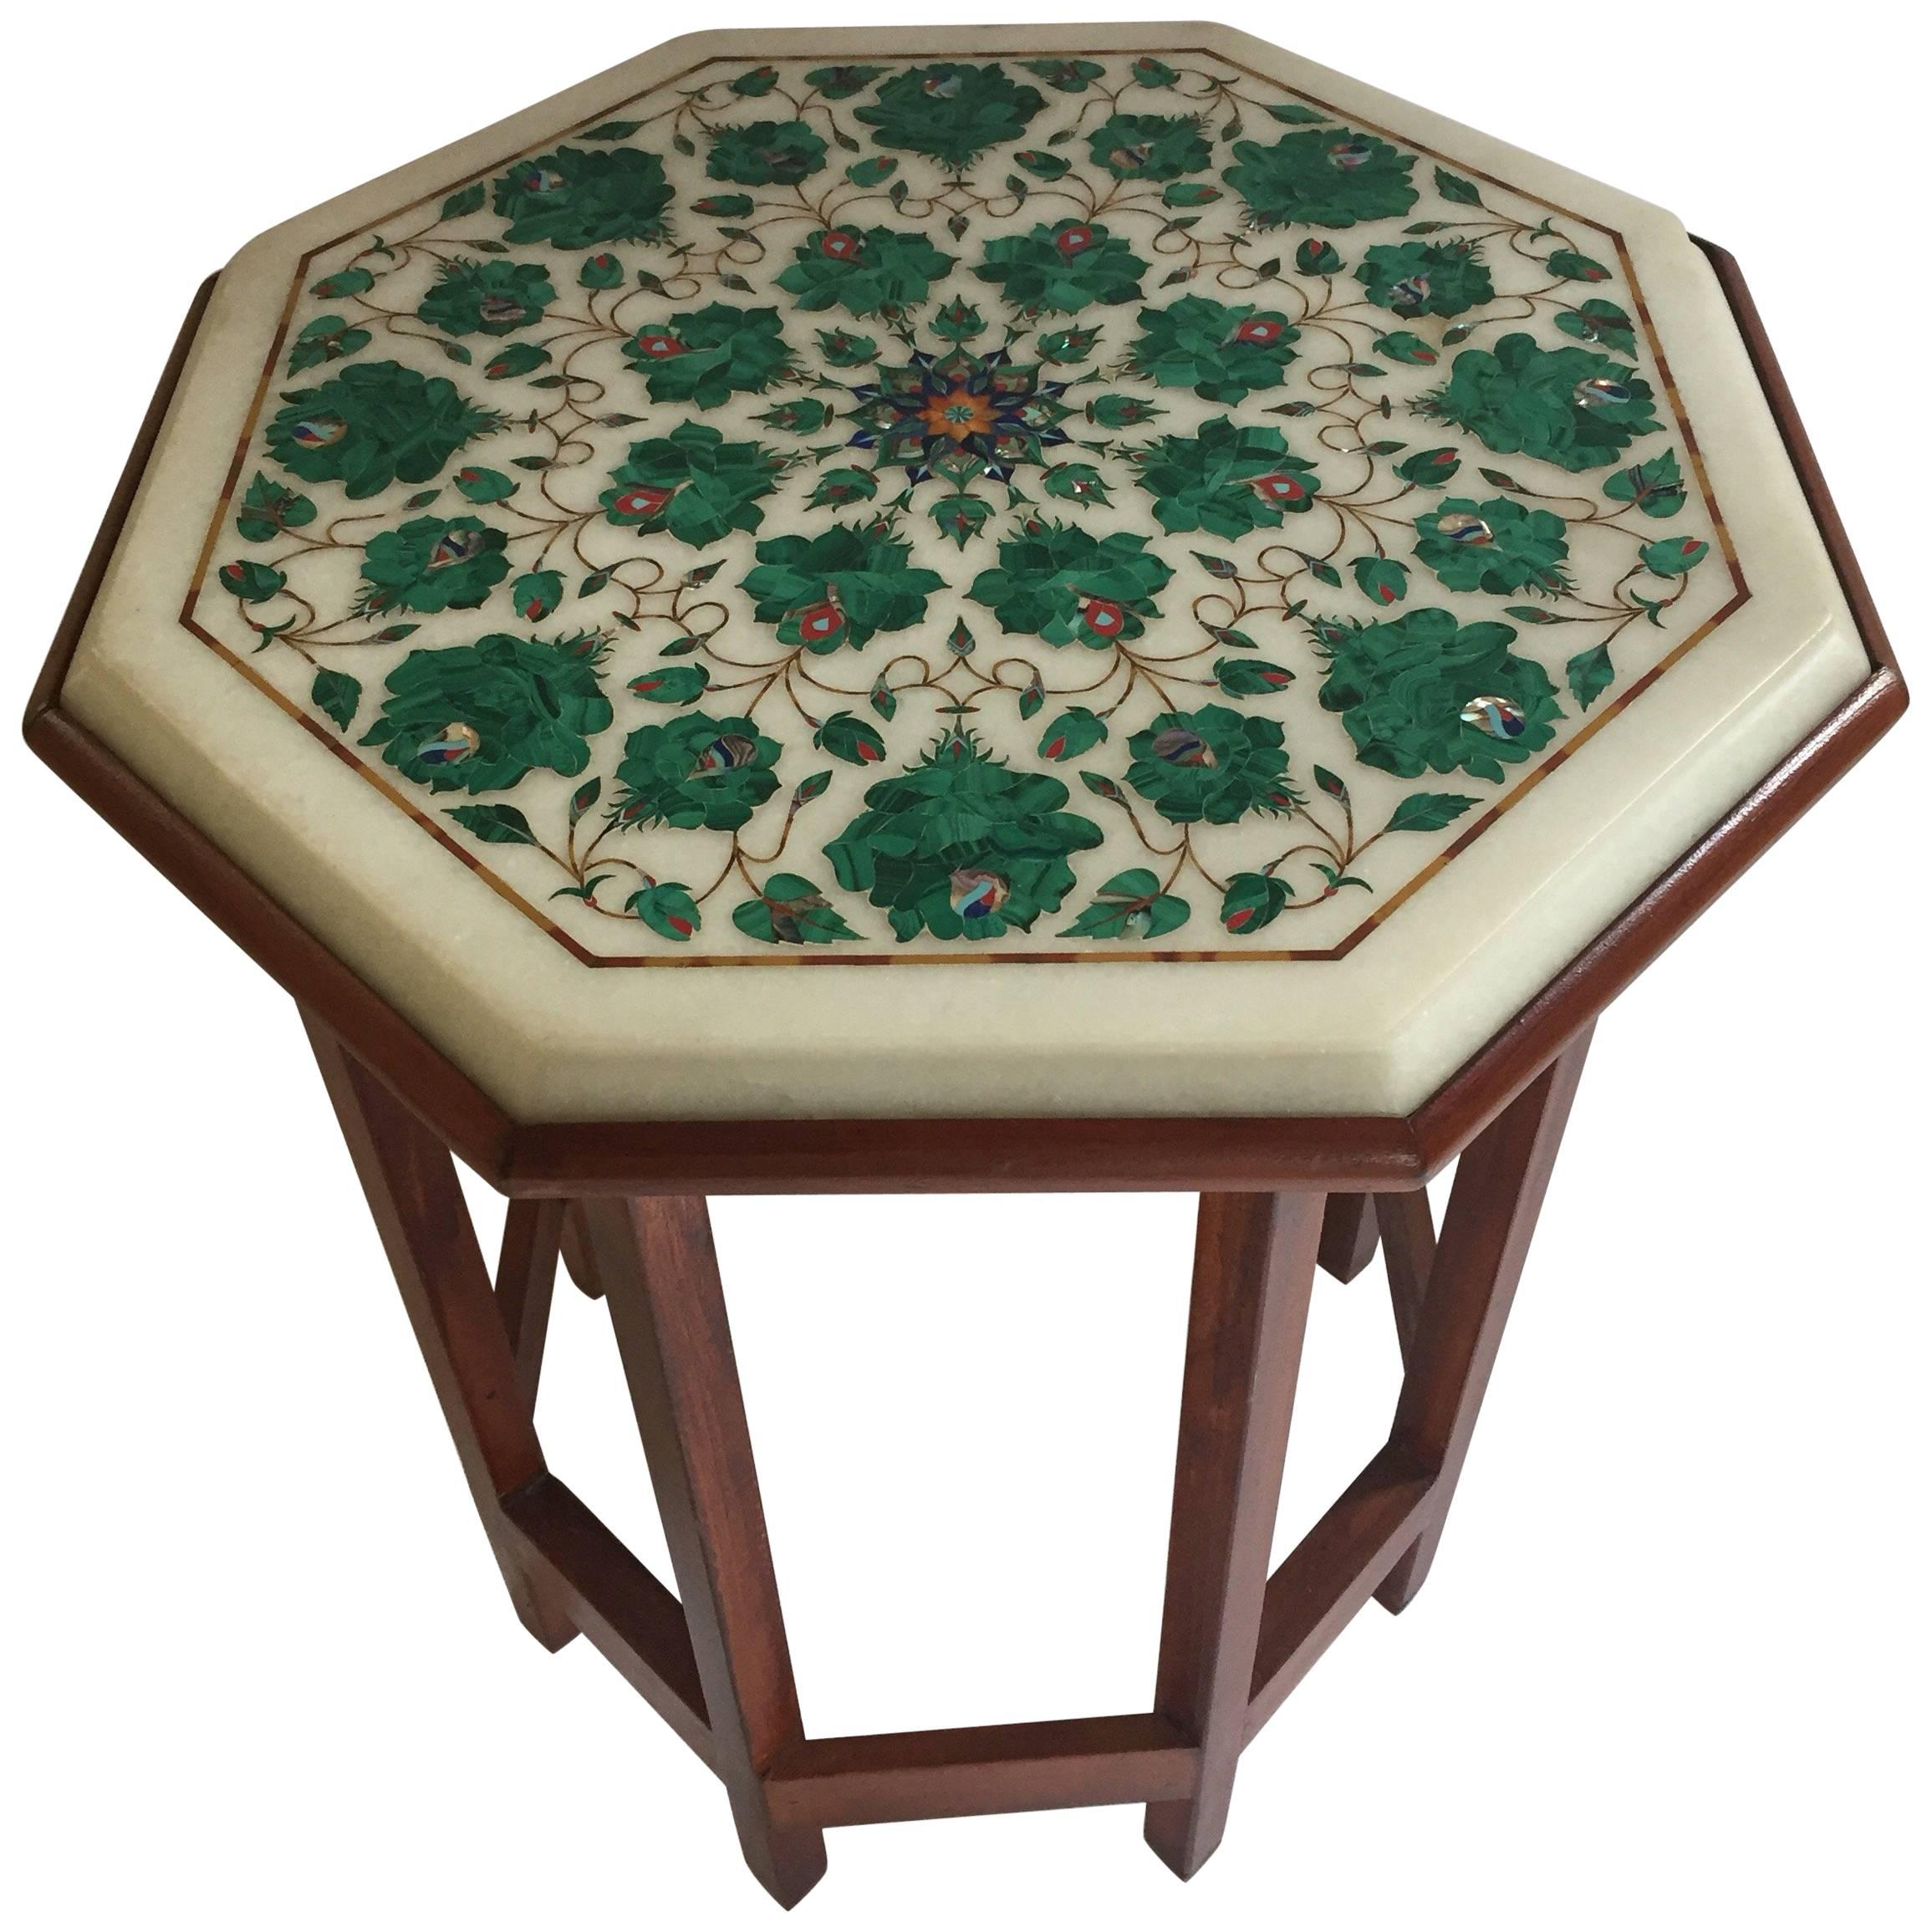 Pietra Dura Marble-Topped Octagonal Table Inlaid in Taj Mahal Anglo Raj Style